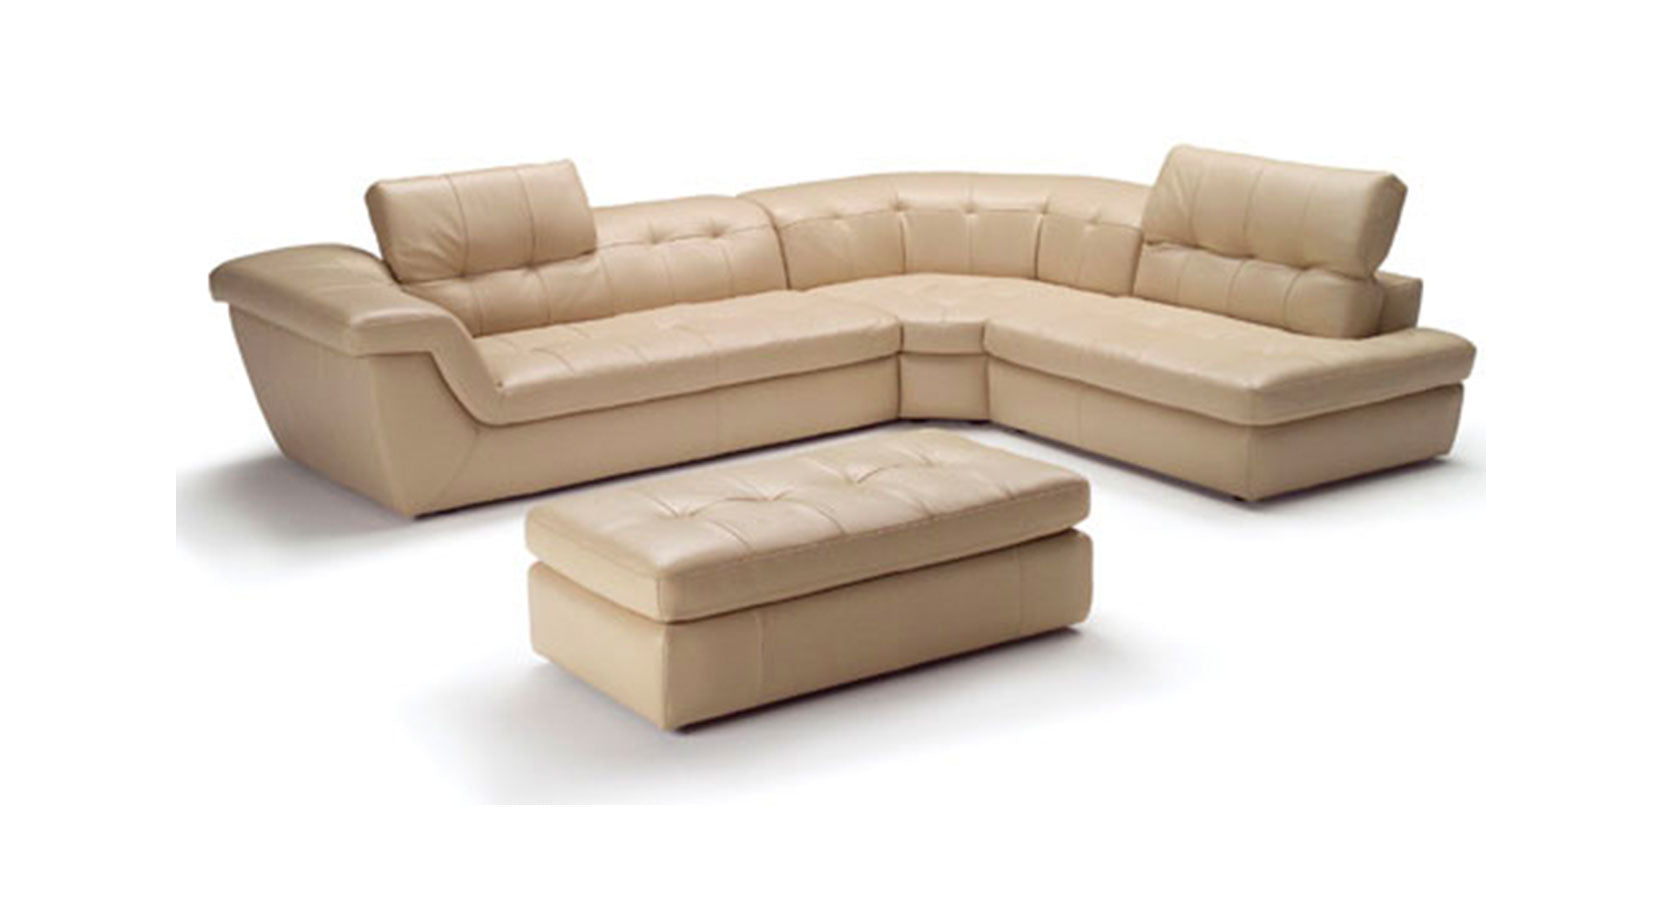 397 Premium Leather Sectional In Chocolate